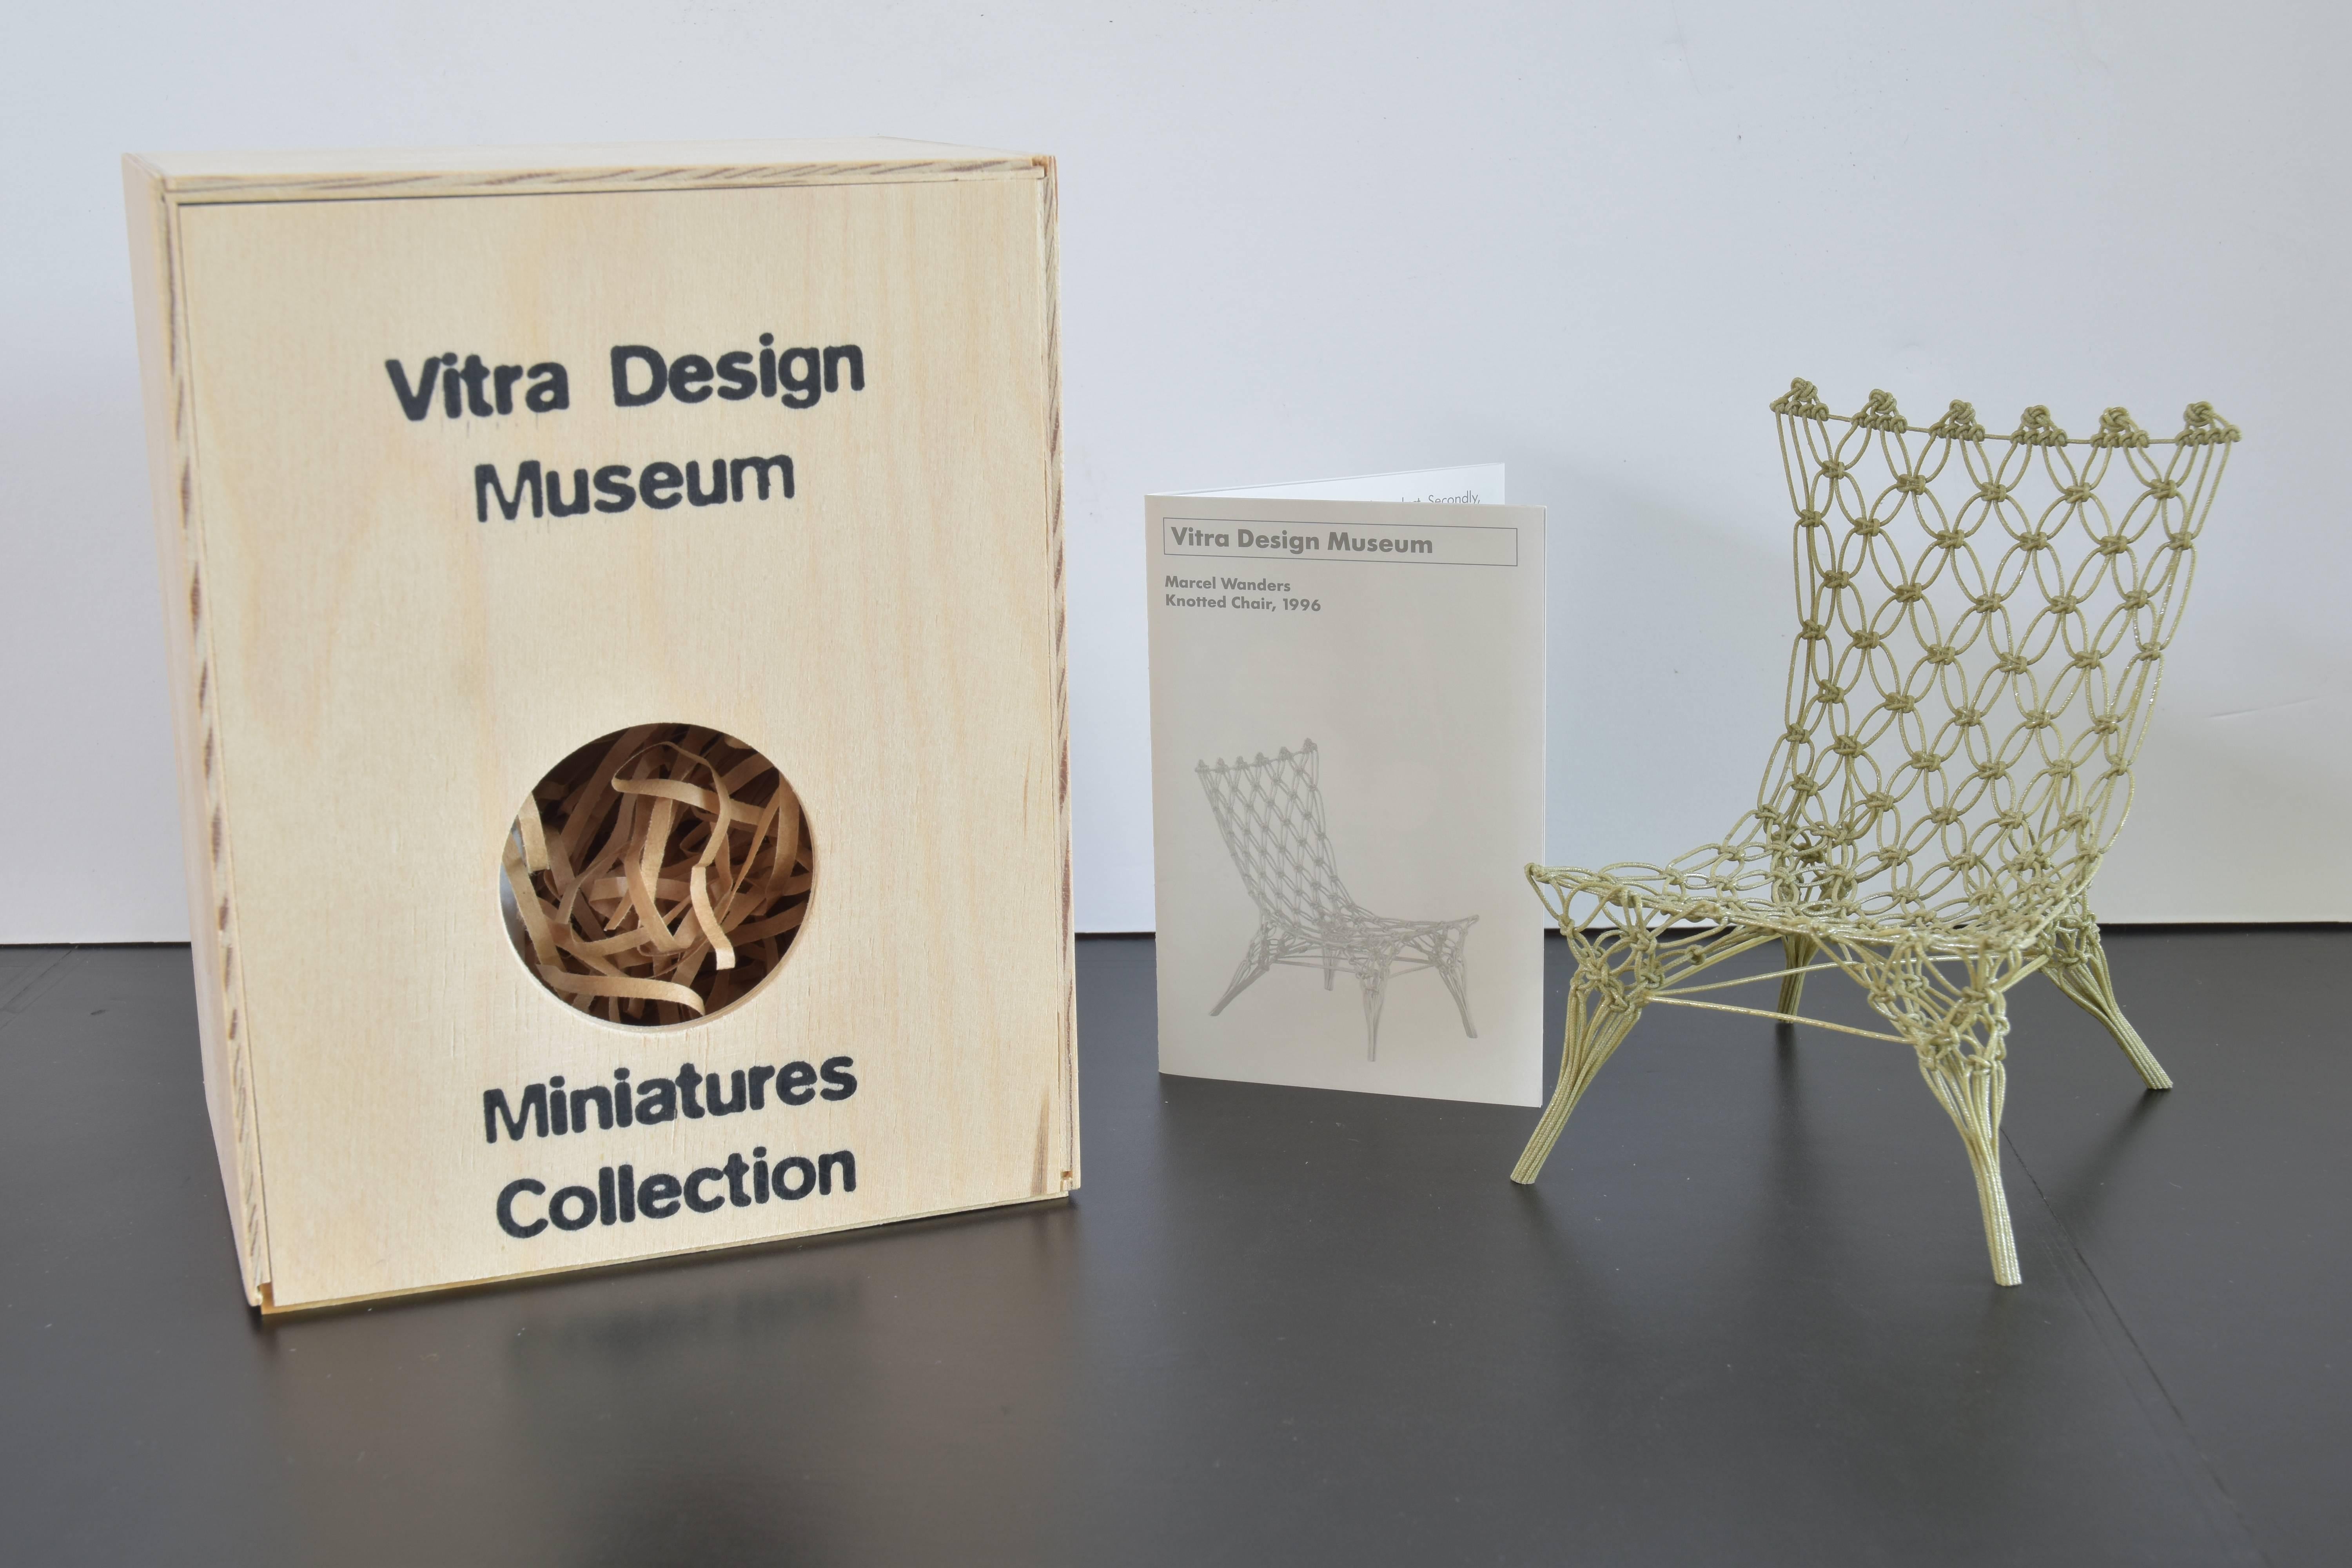 Vitra design museum miniature model of the original Marcel Wanders knotted chair from 1996.

This charming and detailed model includes the original wooden box and historical narrative as noted below:

Marcel Wanders' knotted chair is made from